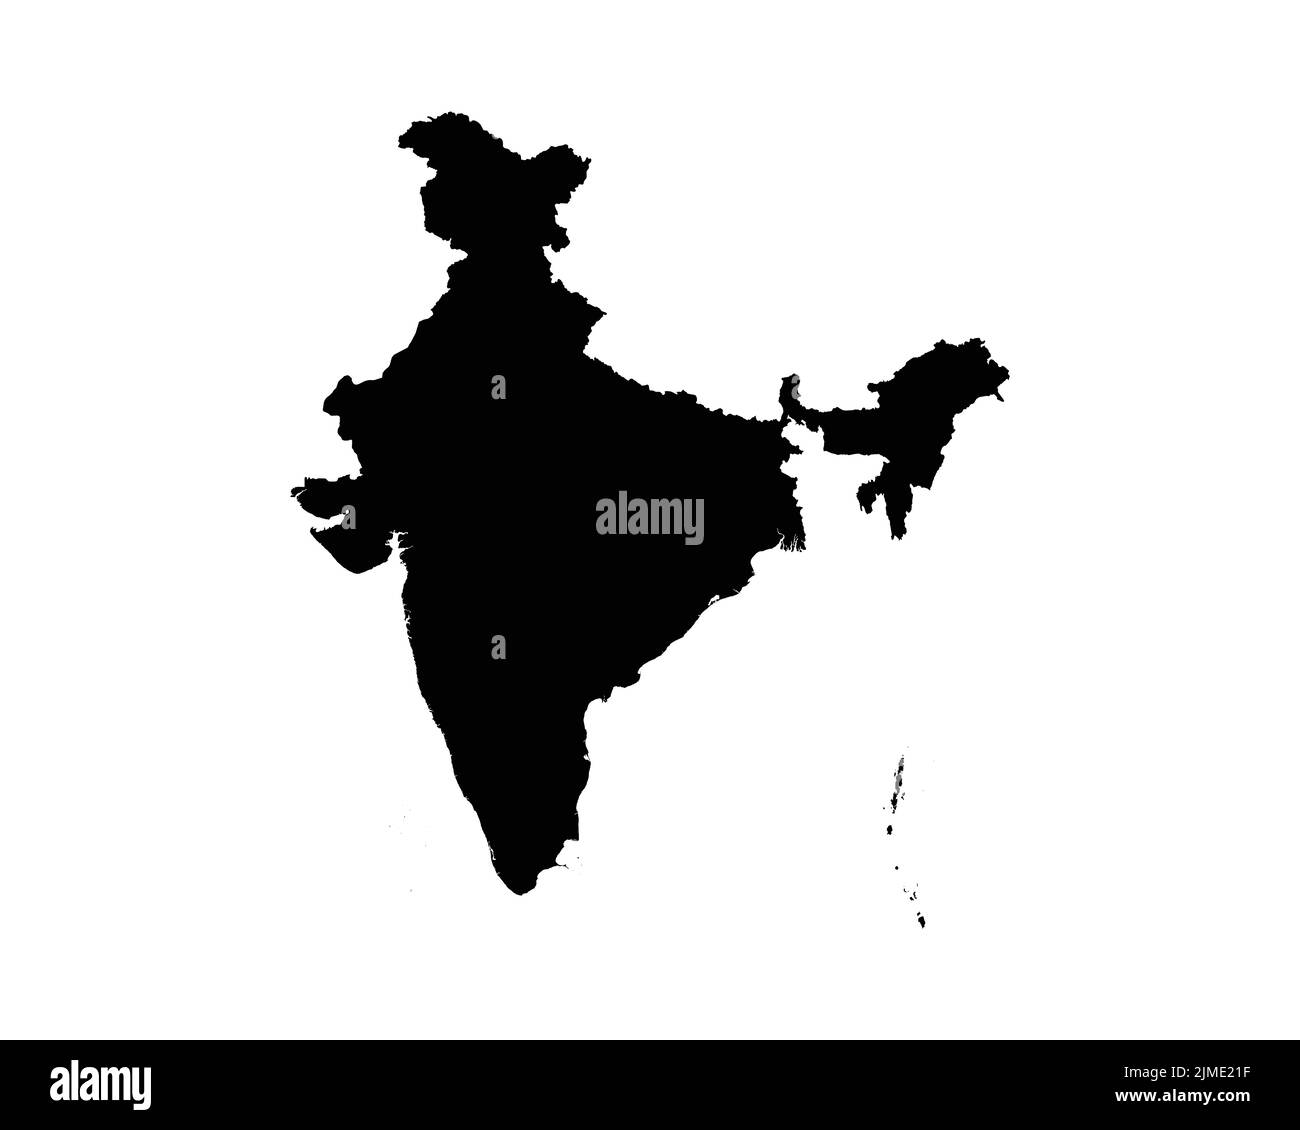 India Map. Indian Country Map. Black and White National Nation Outline Geography Border Boundary Shape Territory Vector Illustration EPS Clipart Stock Vector